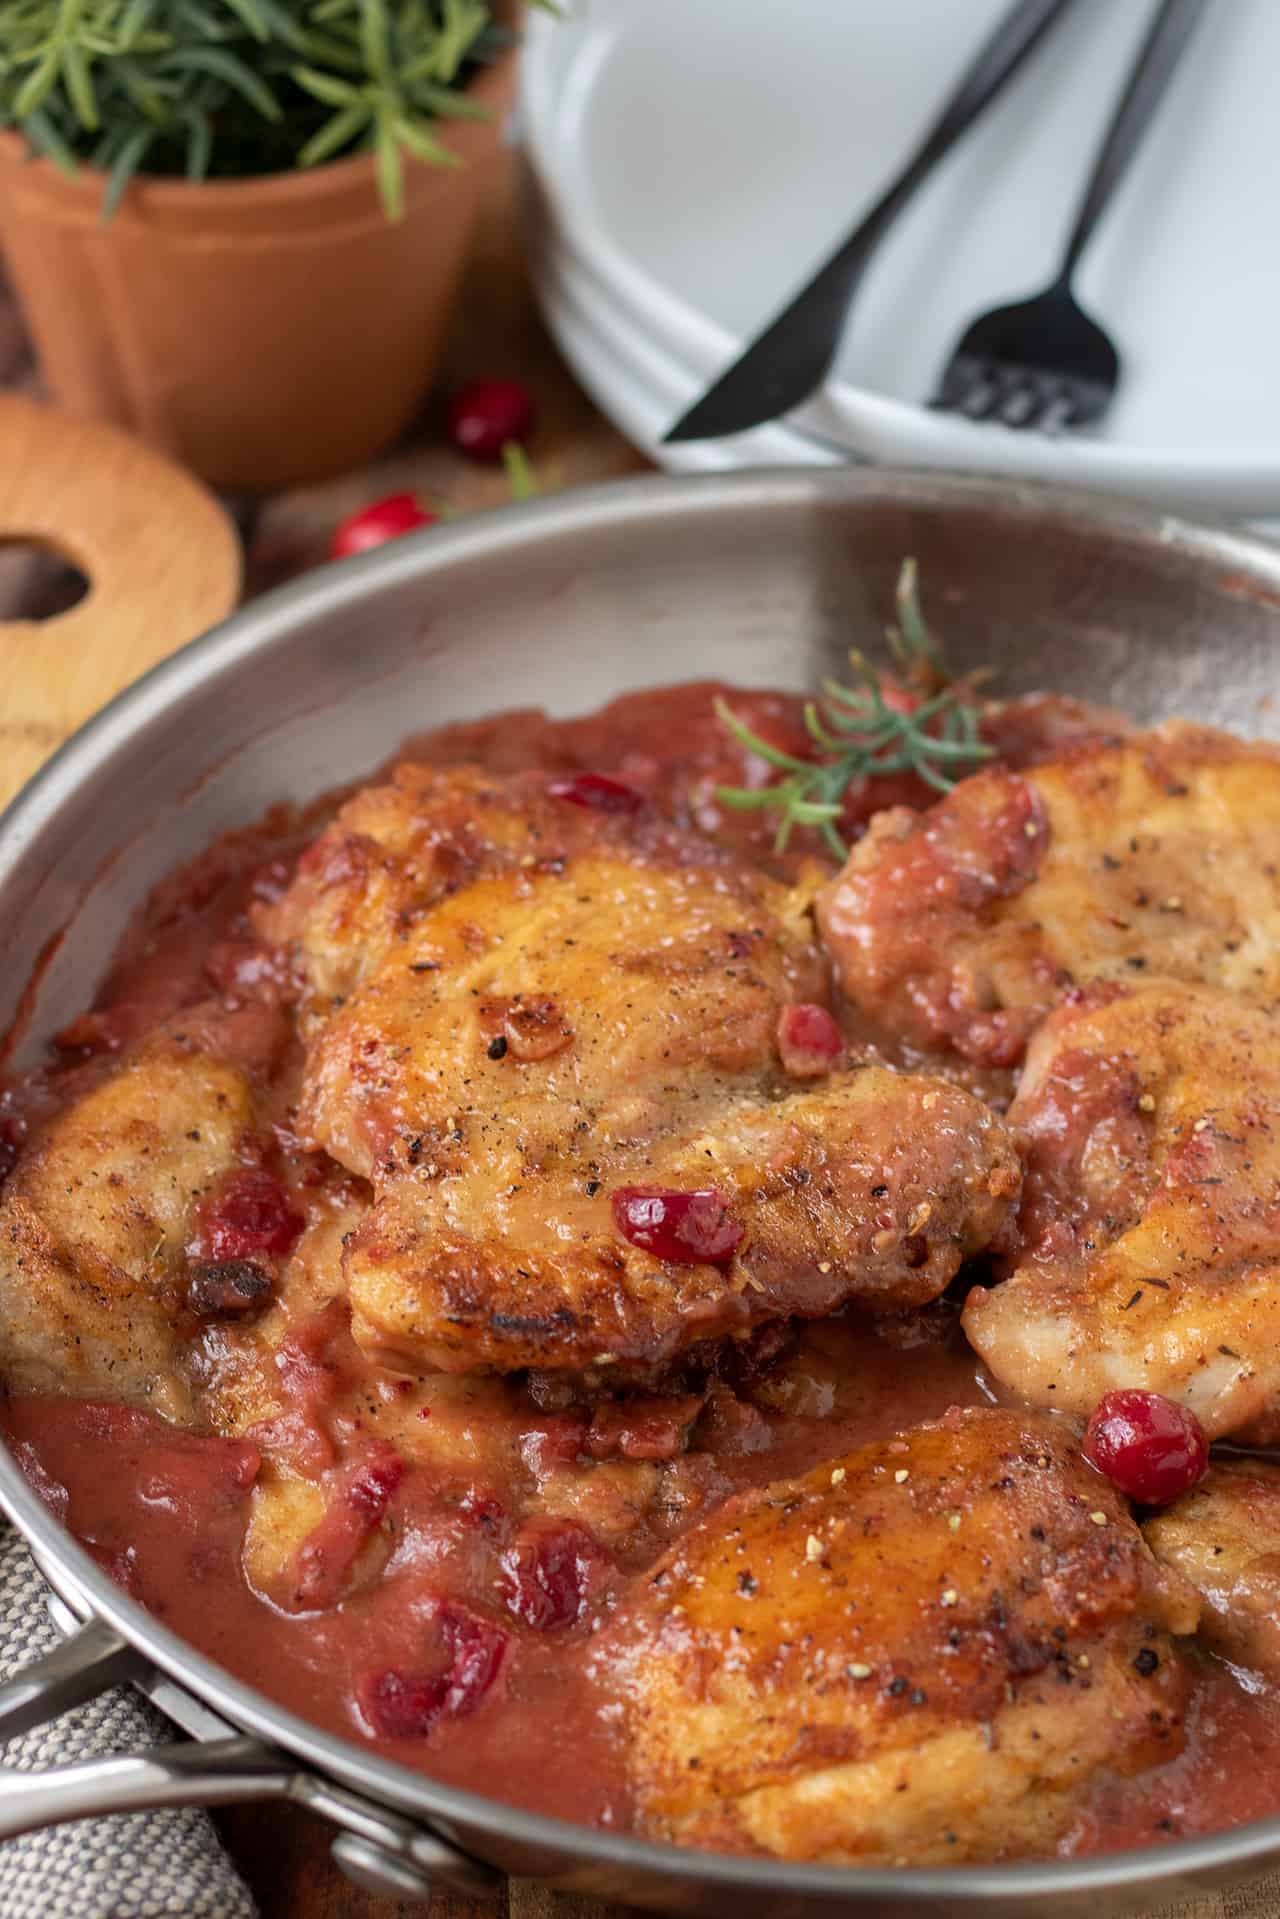 A stainless steel skillet with pan seared chicken thighs. They're golden brown and covered in a cranberry gravy. There's a sprig of fresh rosemary in the pan and a couple of whole cranberries. There's a stack of white dishes with a fork and knife in the background with a small rosemary plant and a wooden spatula.